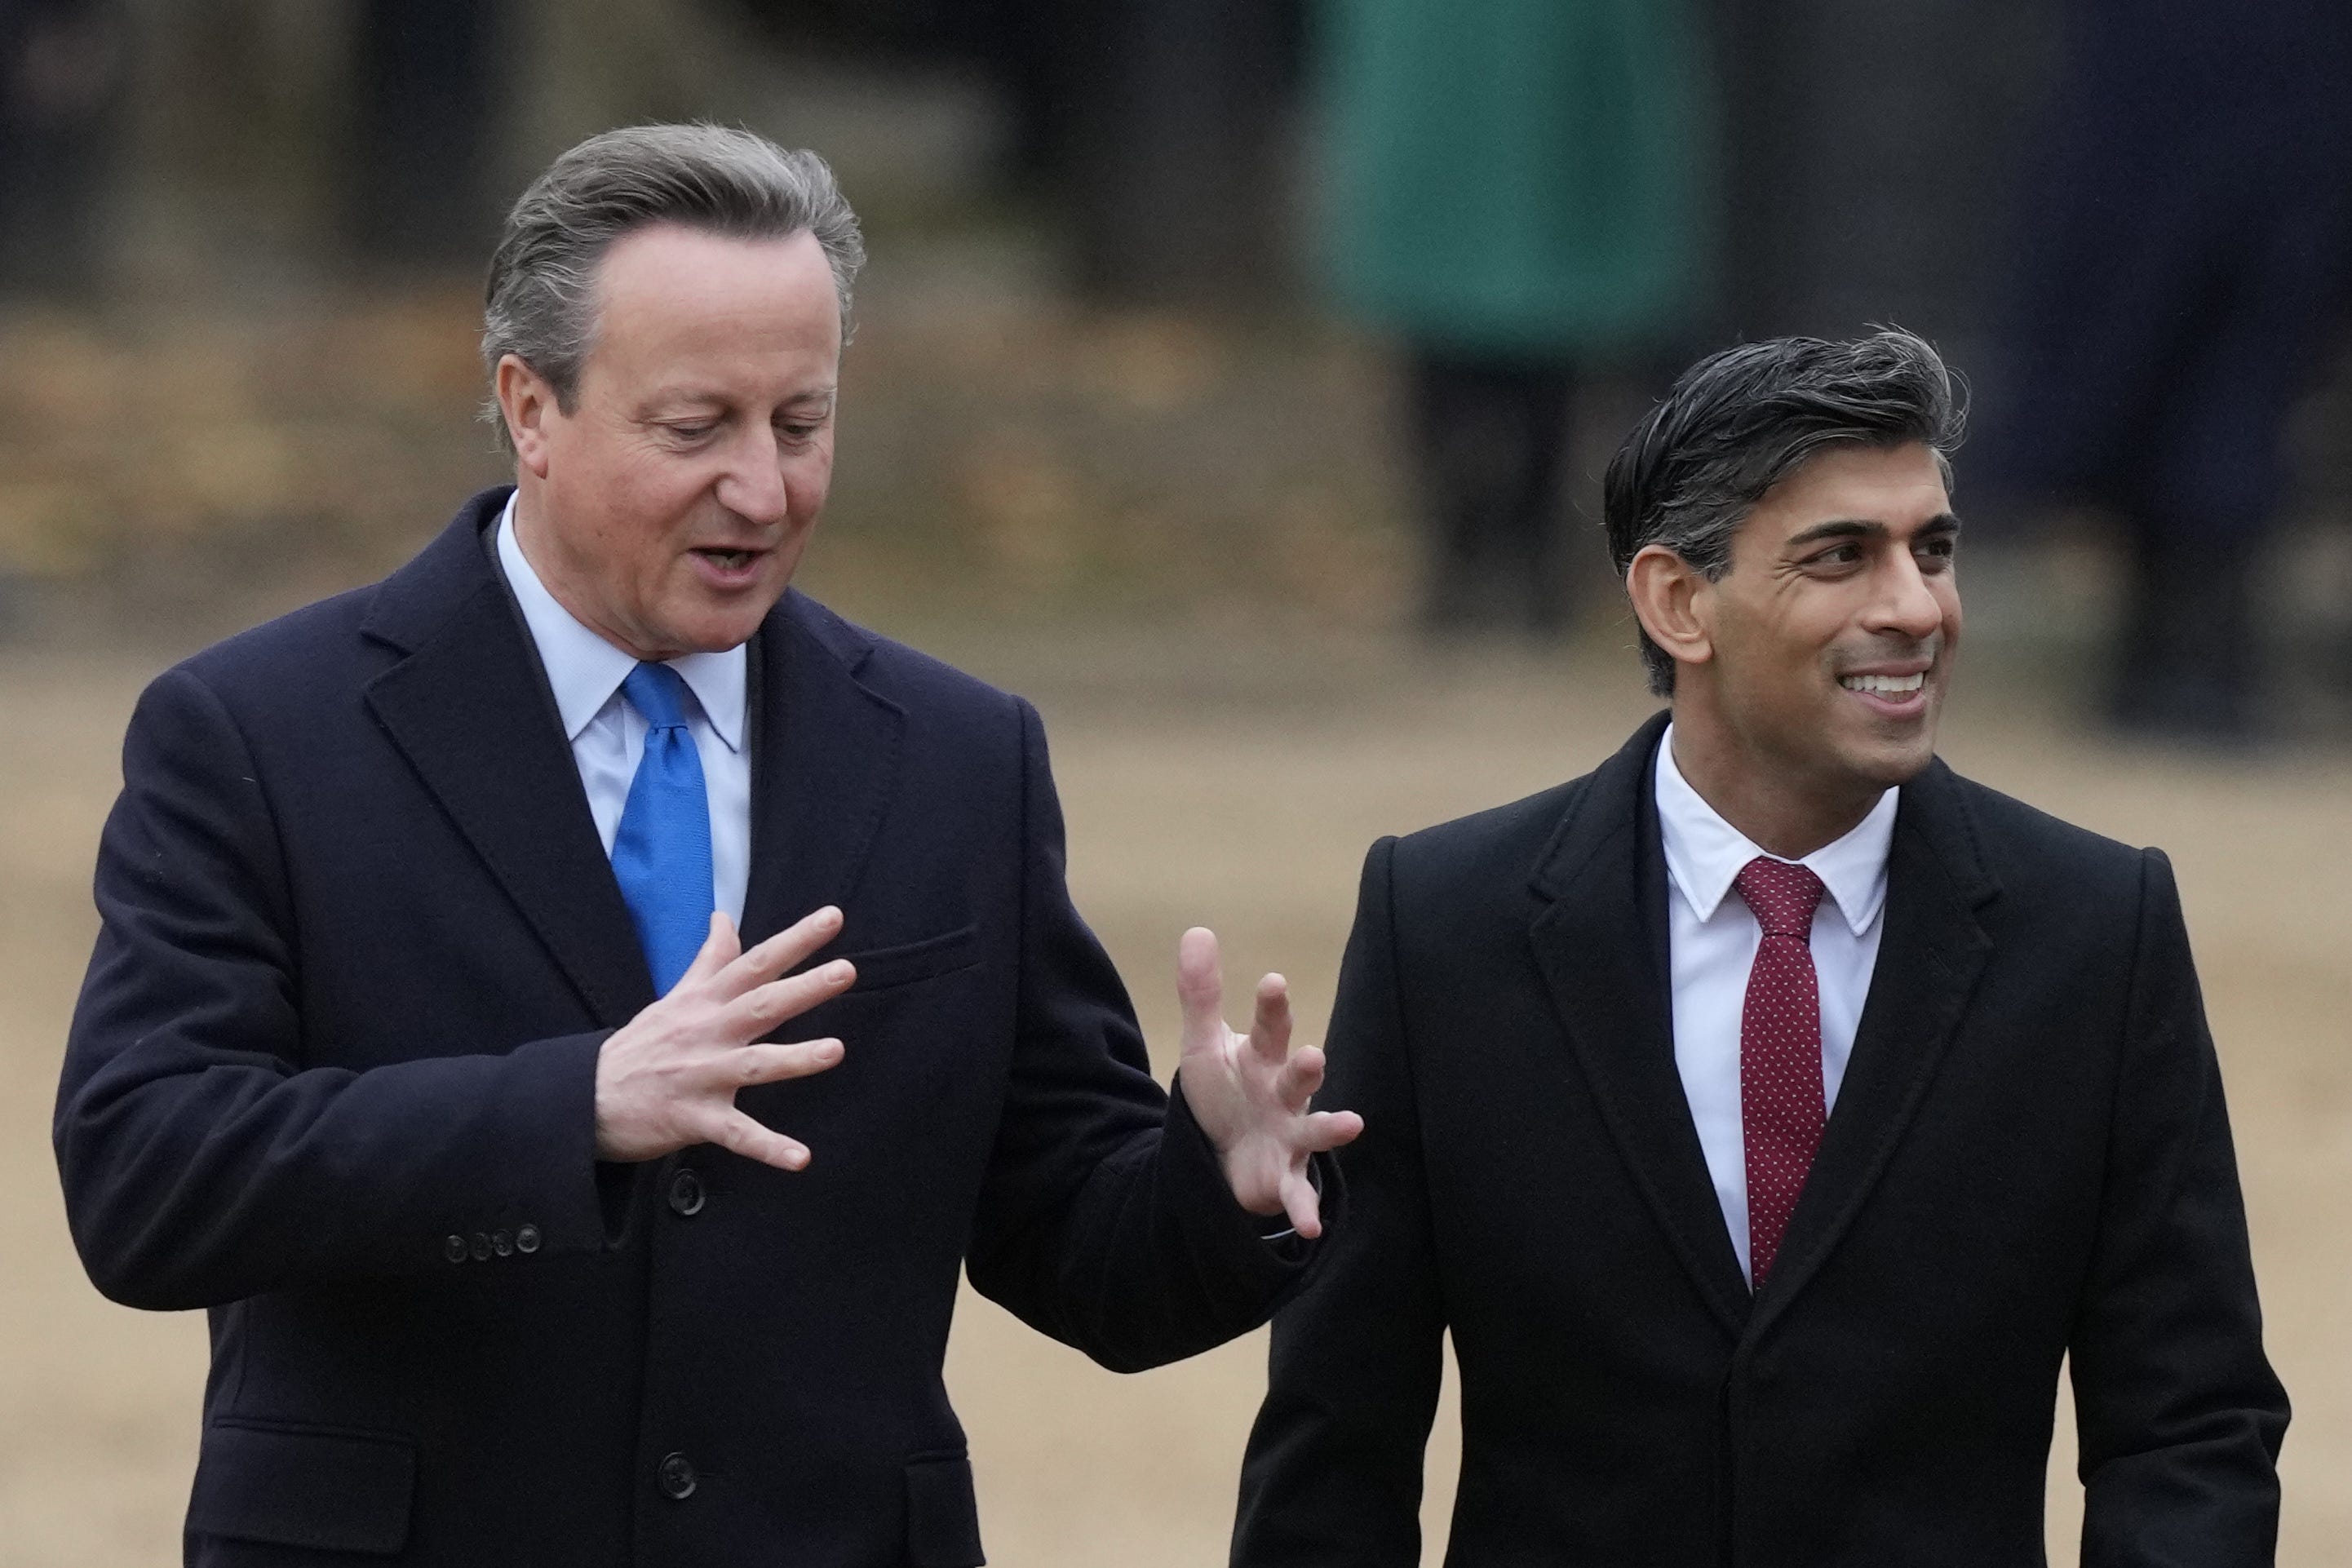 Lord Cameron said Rishi Sunak is ‘absolutely right’ to wait and hold a general election this autumn